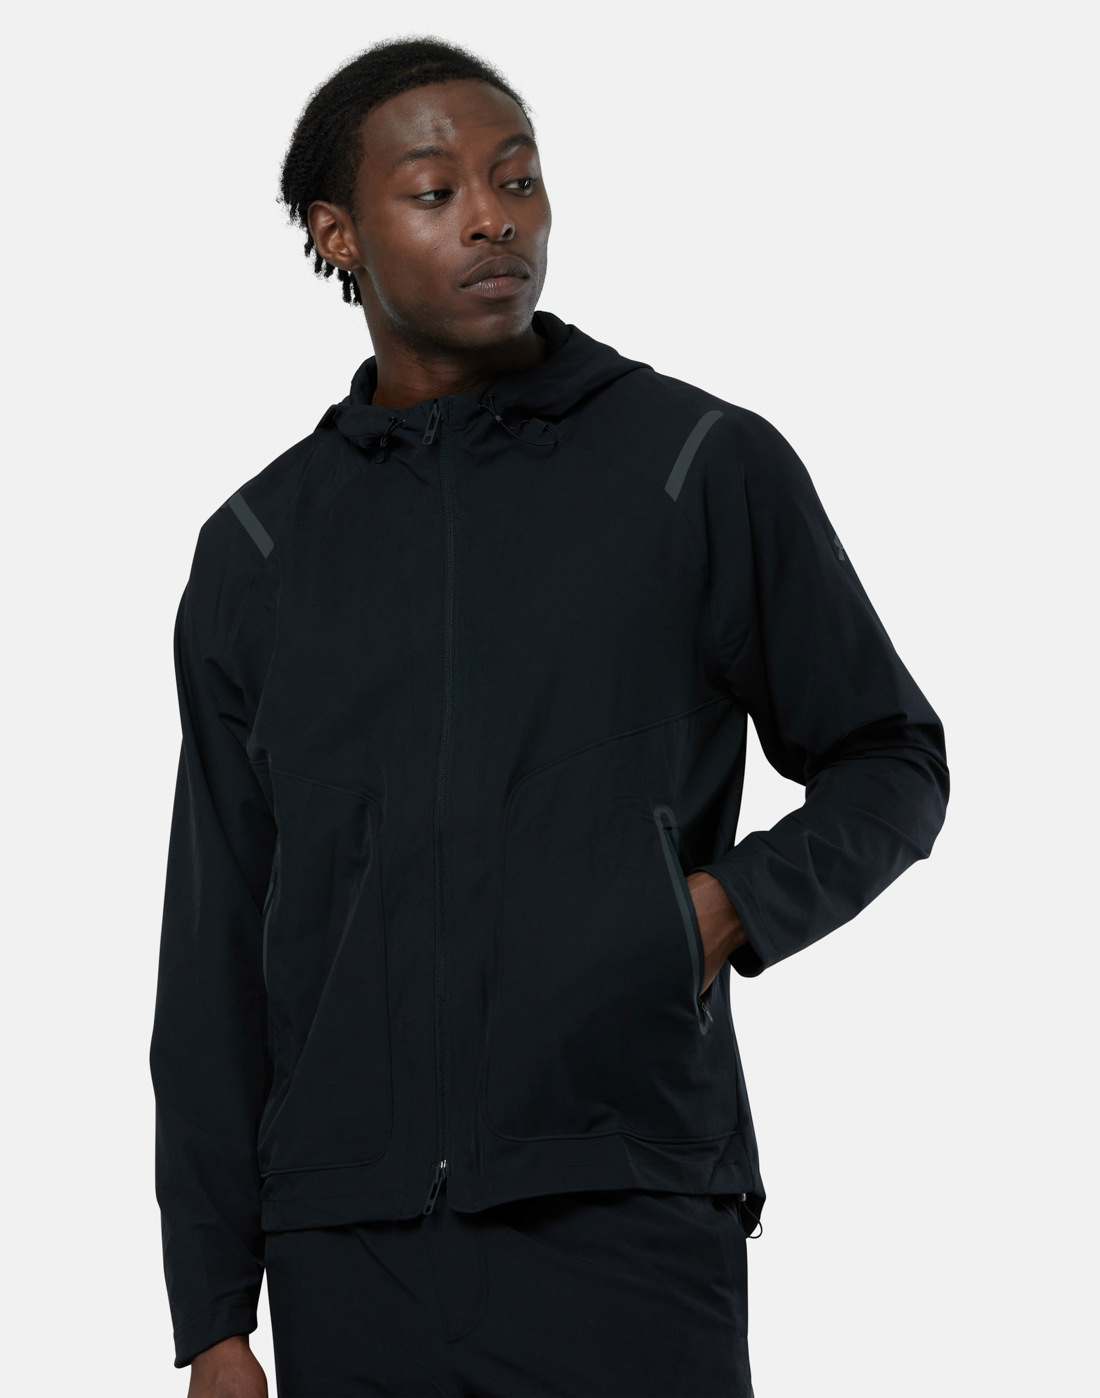 Under Armour Mens Unstoppable Jacket - Black | Life Style Sports EU